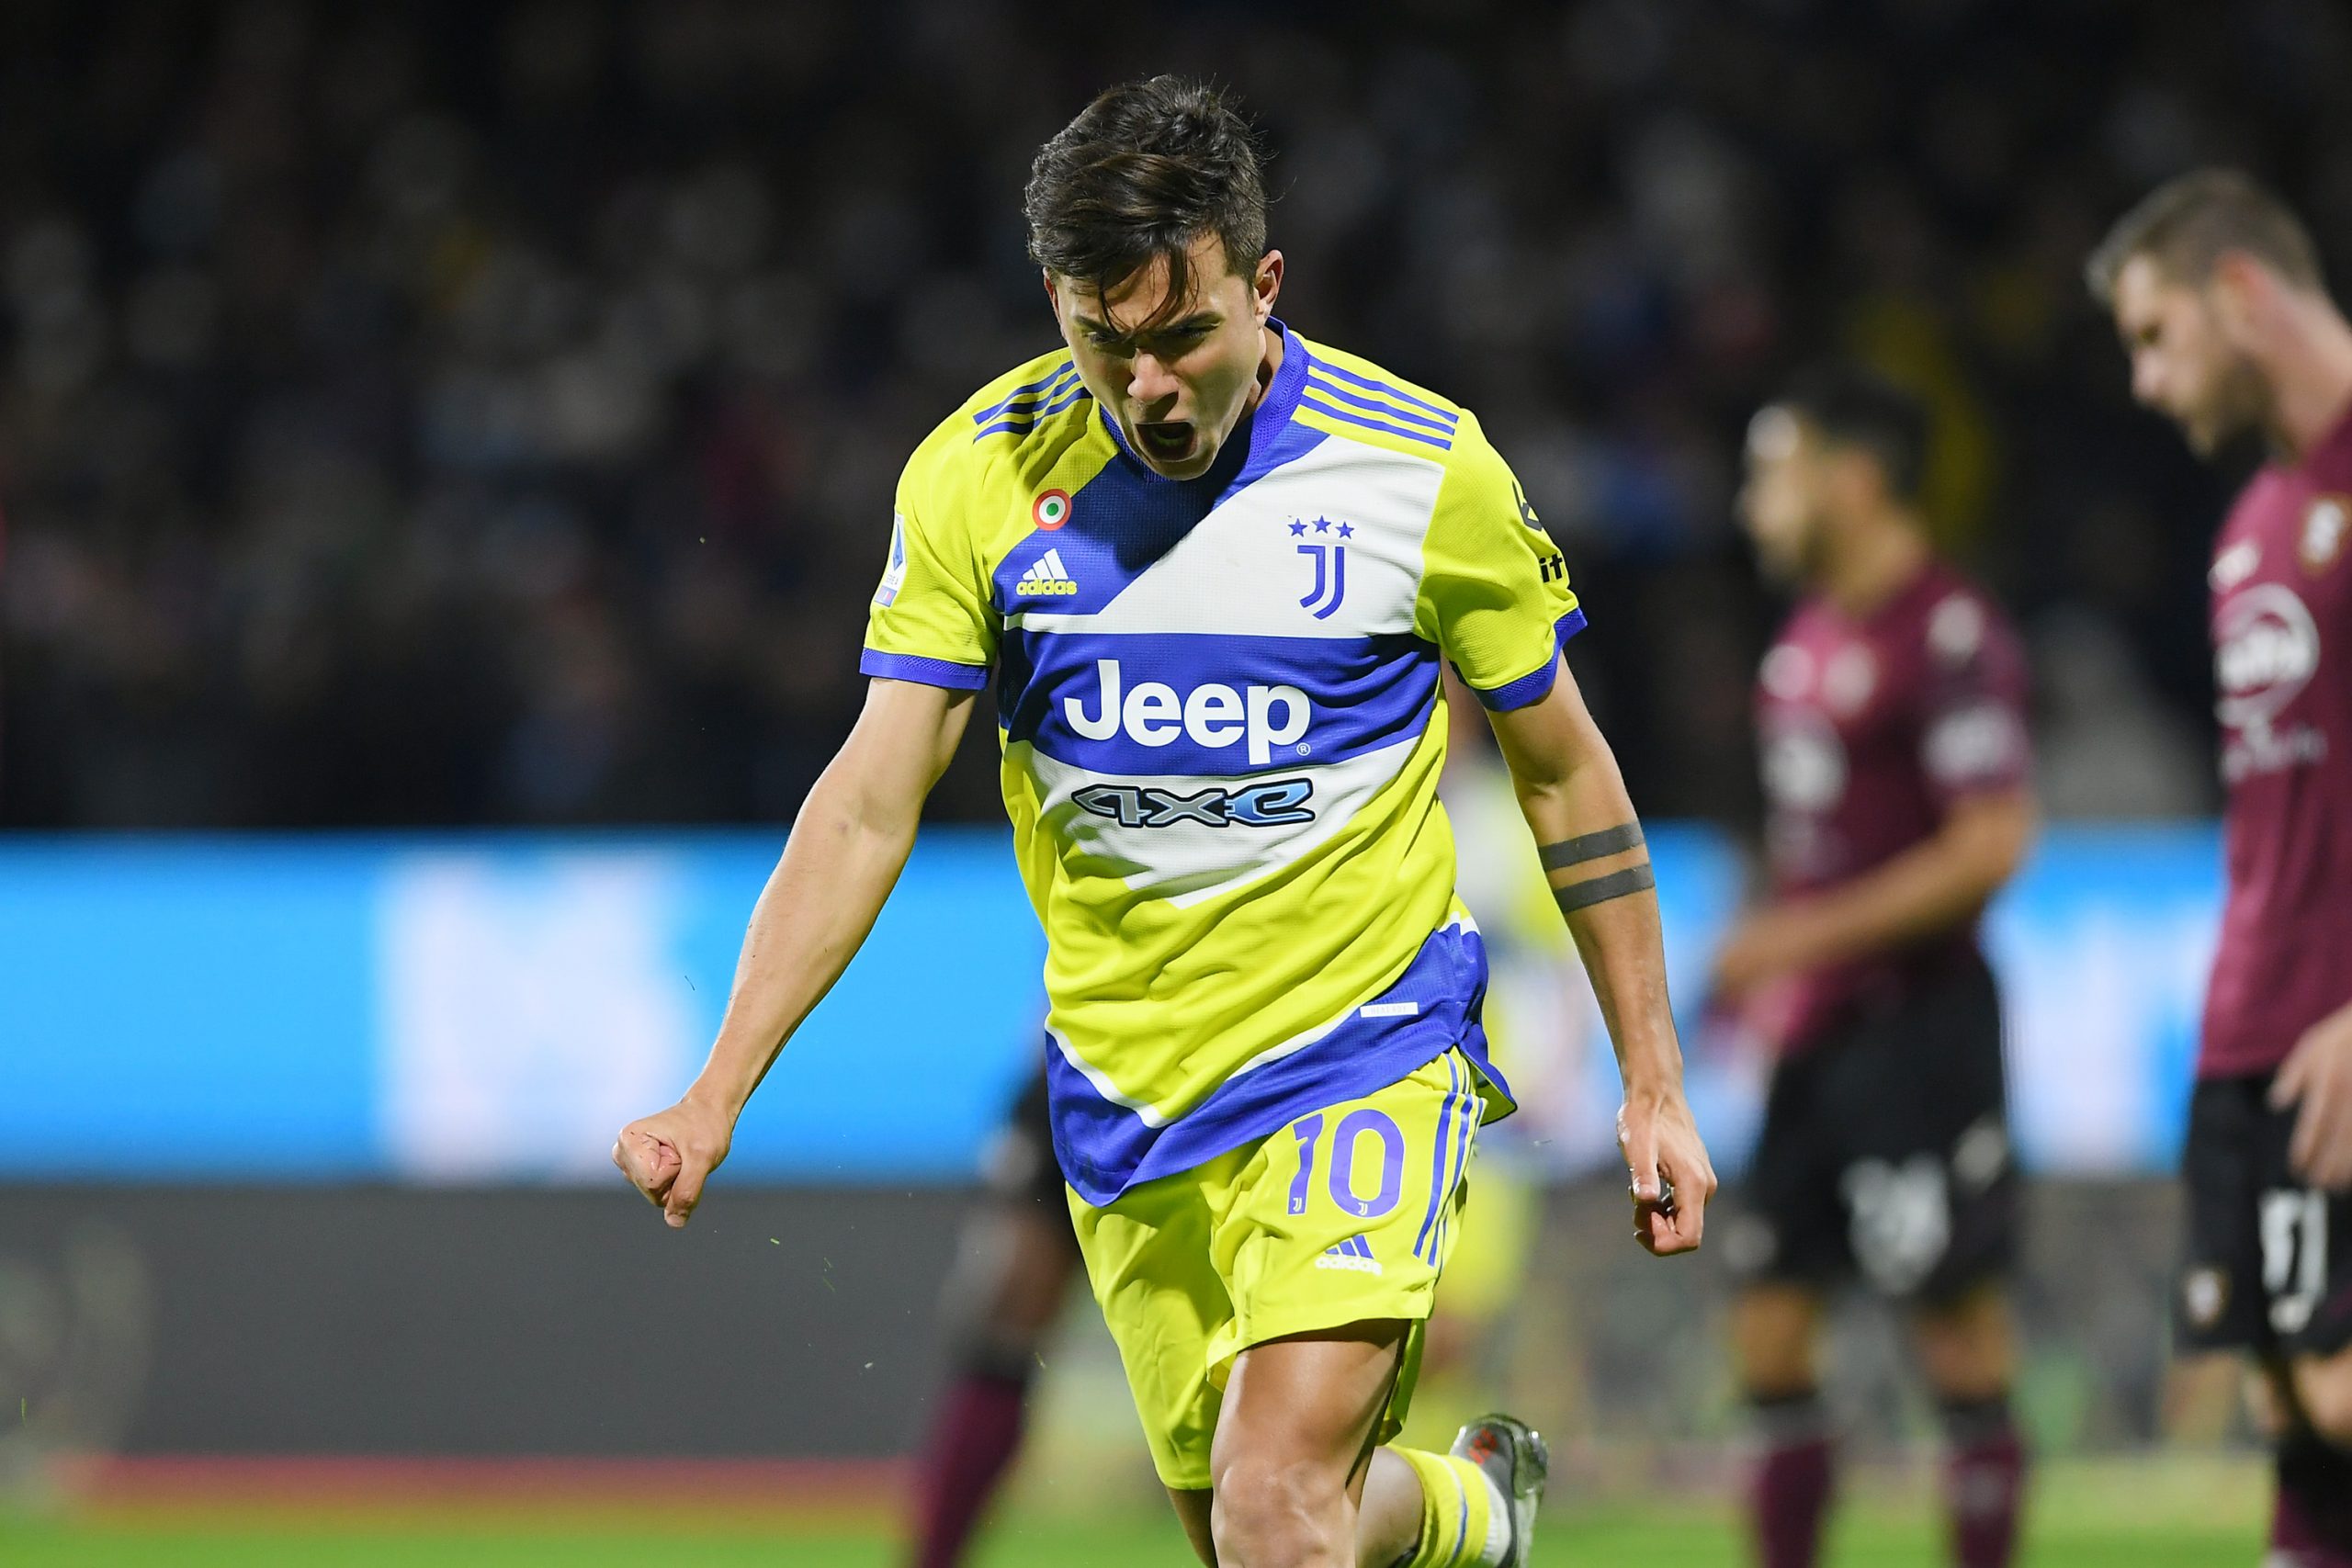 Transfer News: Manchester United target Paulo Dybala rejects Newcastle United offer.